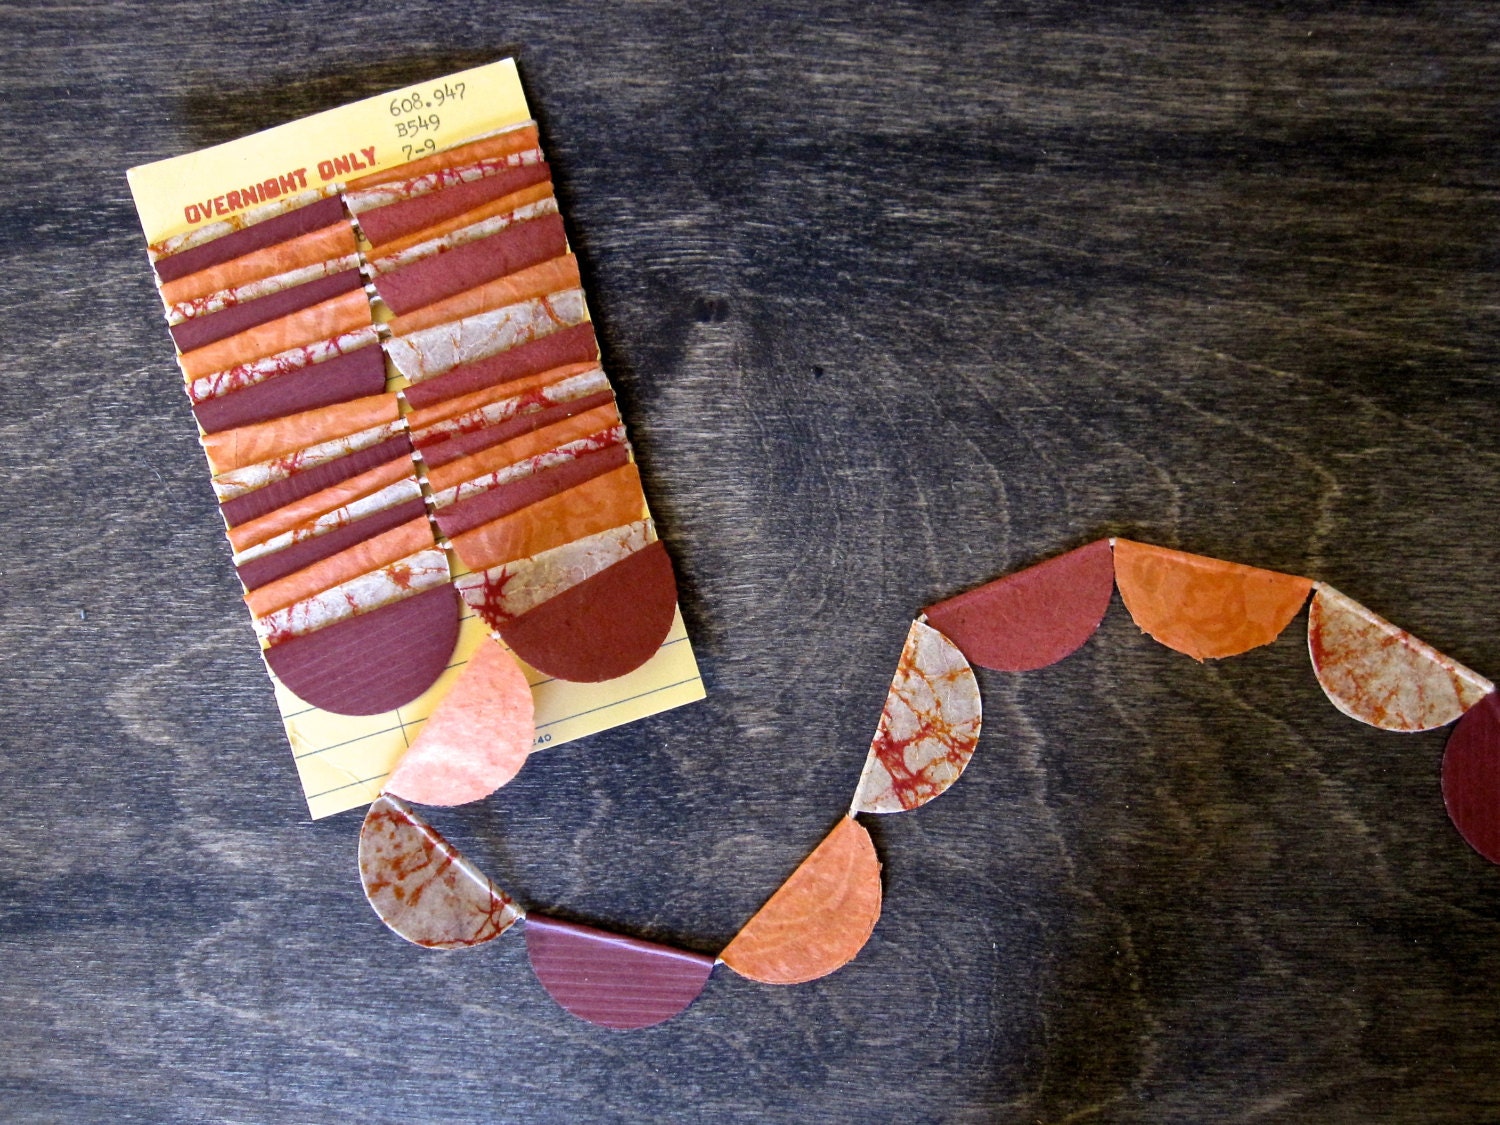 Silk Road Spice Color Garland - Rich Red and Orange Paisley Paper Bunting - Palimpsestic